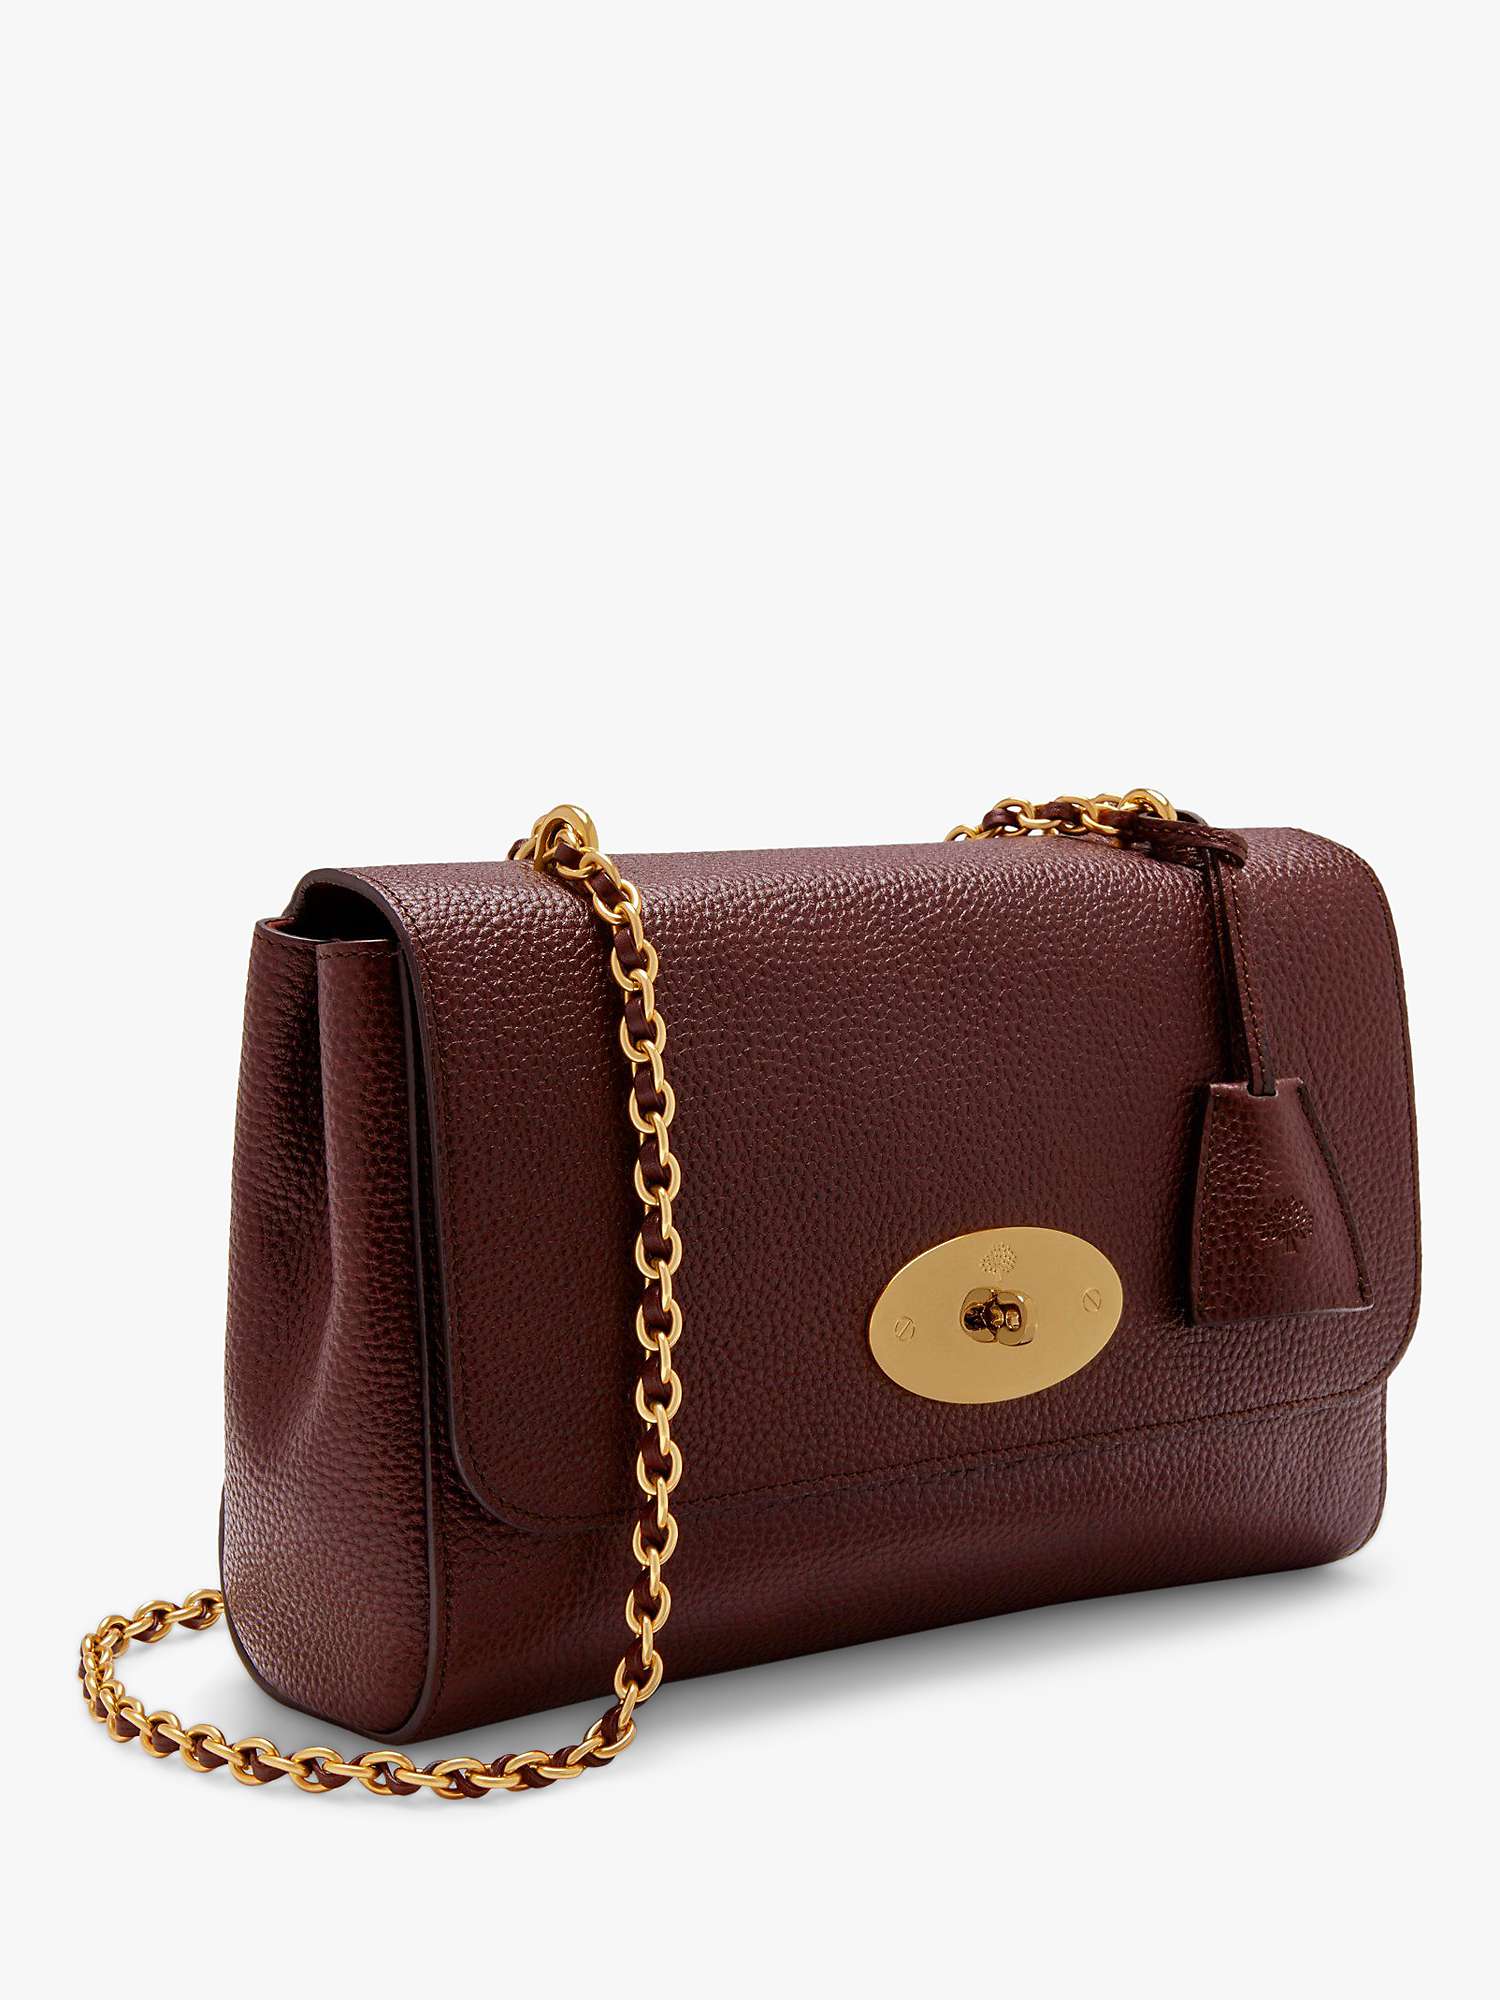 Buy Mulberry Medium Lily Classic Grain Leather Shoulder Bag Online at johnlewis.com